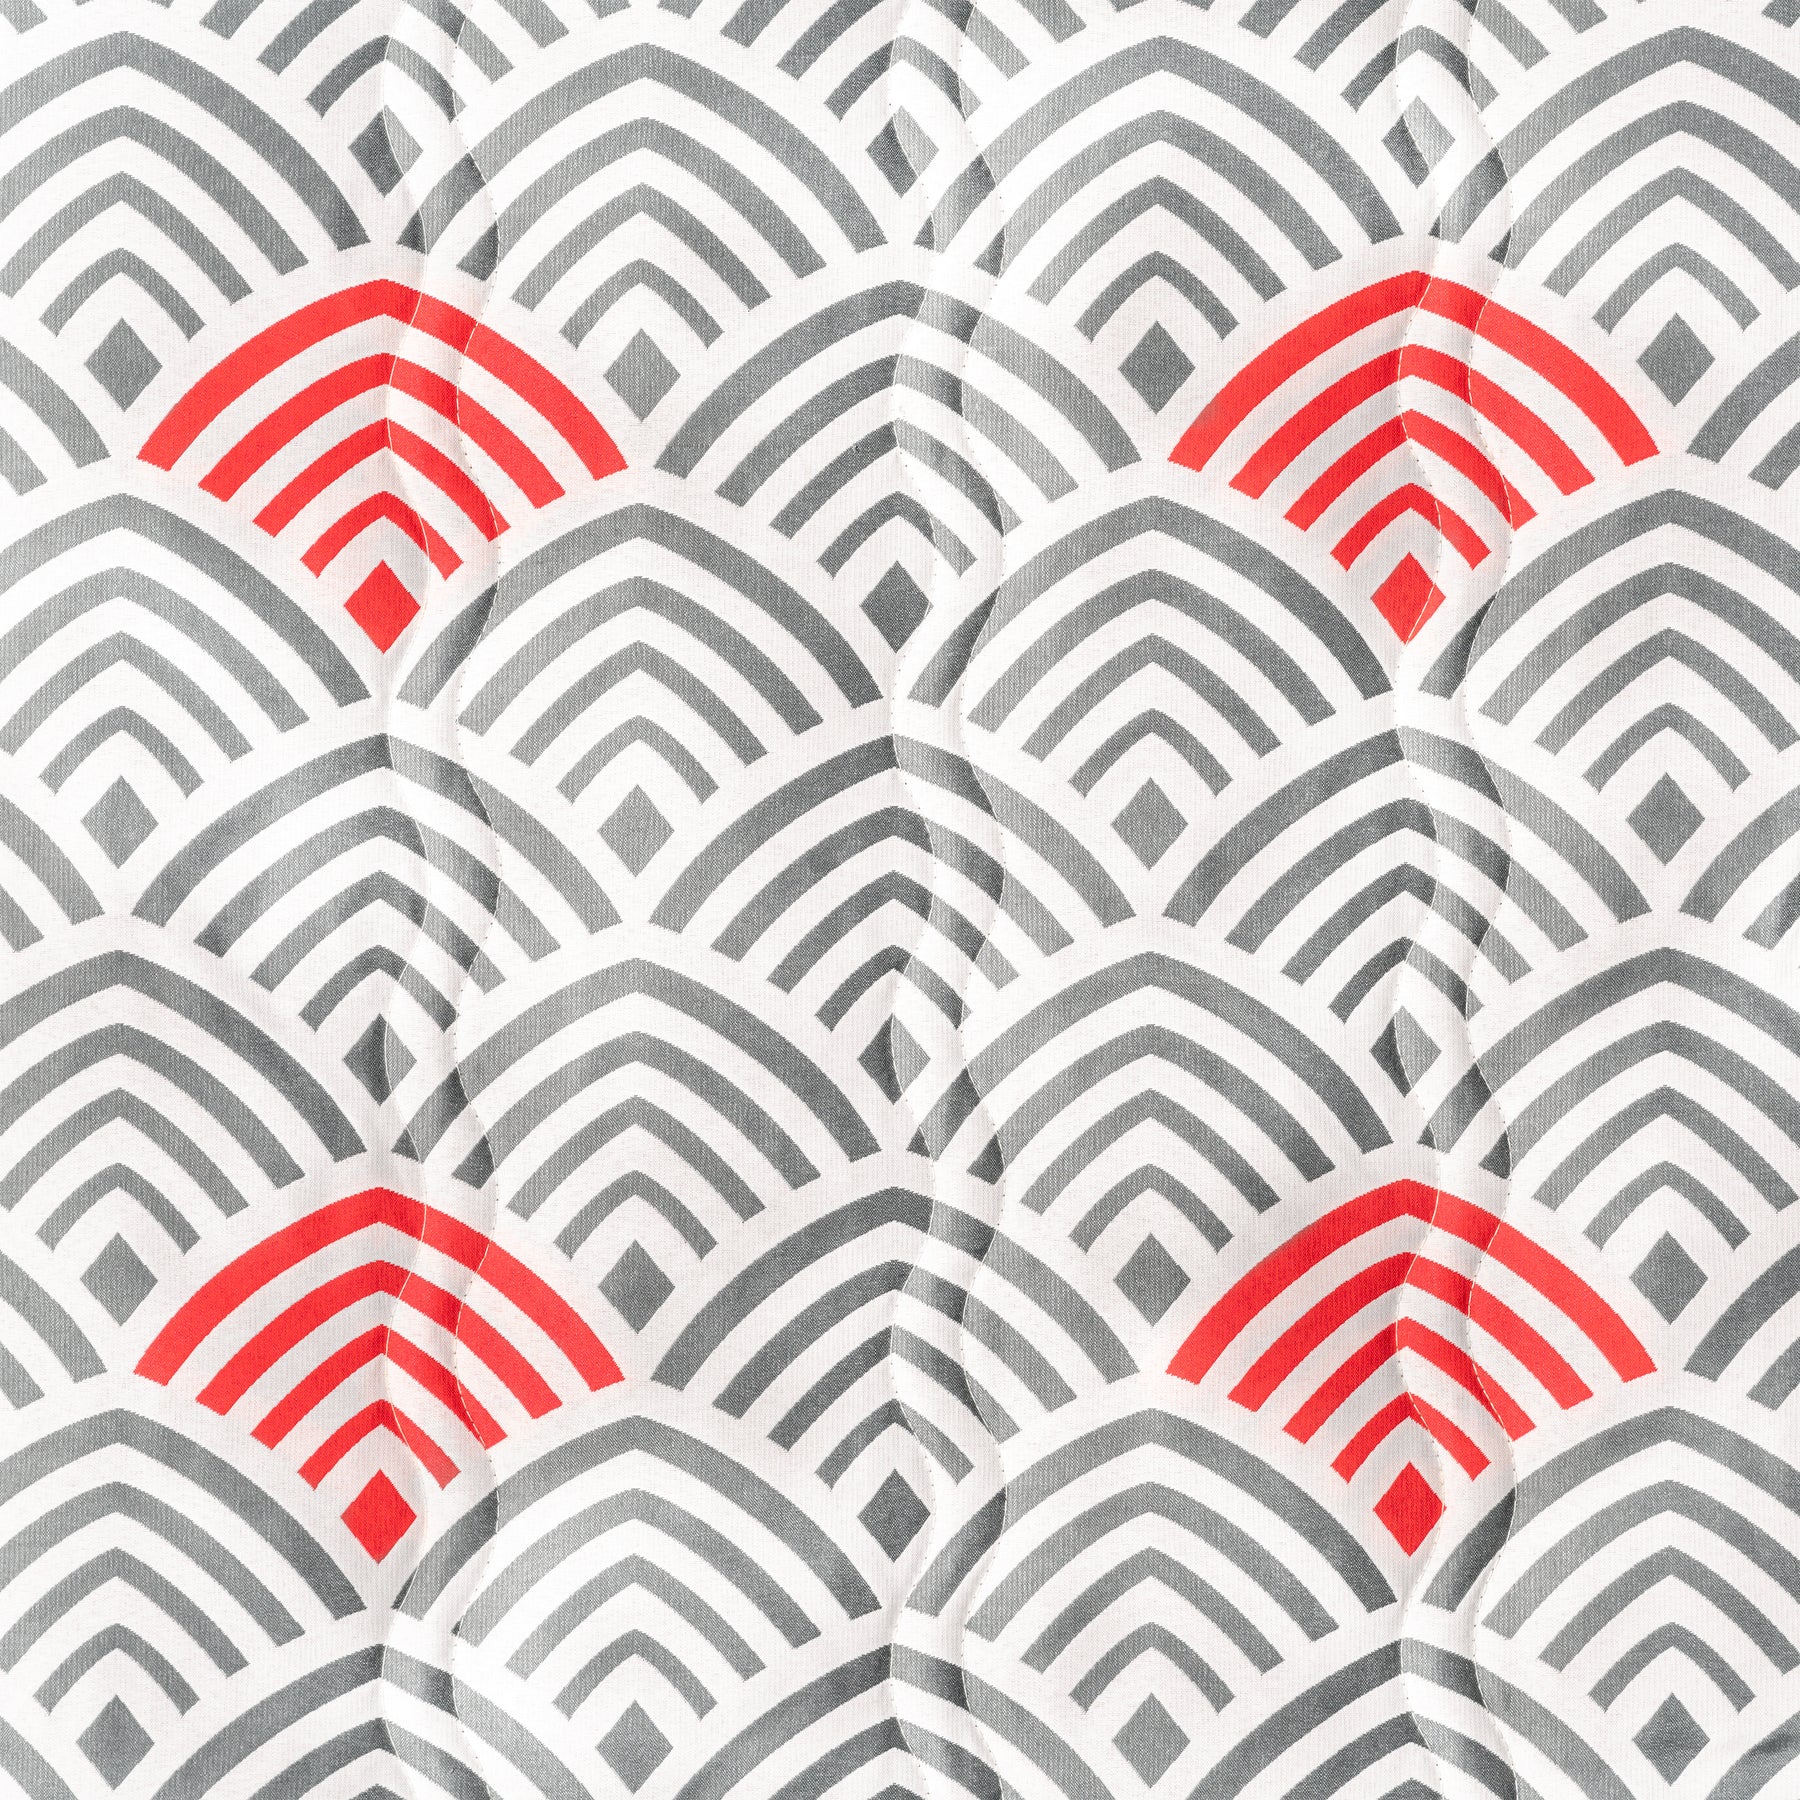 Close up of the fabric and pattern for the Bliss Hammocks 55-inch Wide 2-Person Reversible Quilted Hammock in the tonal arches red and gray variation.